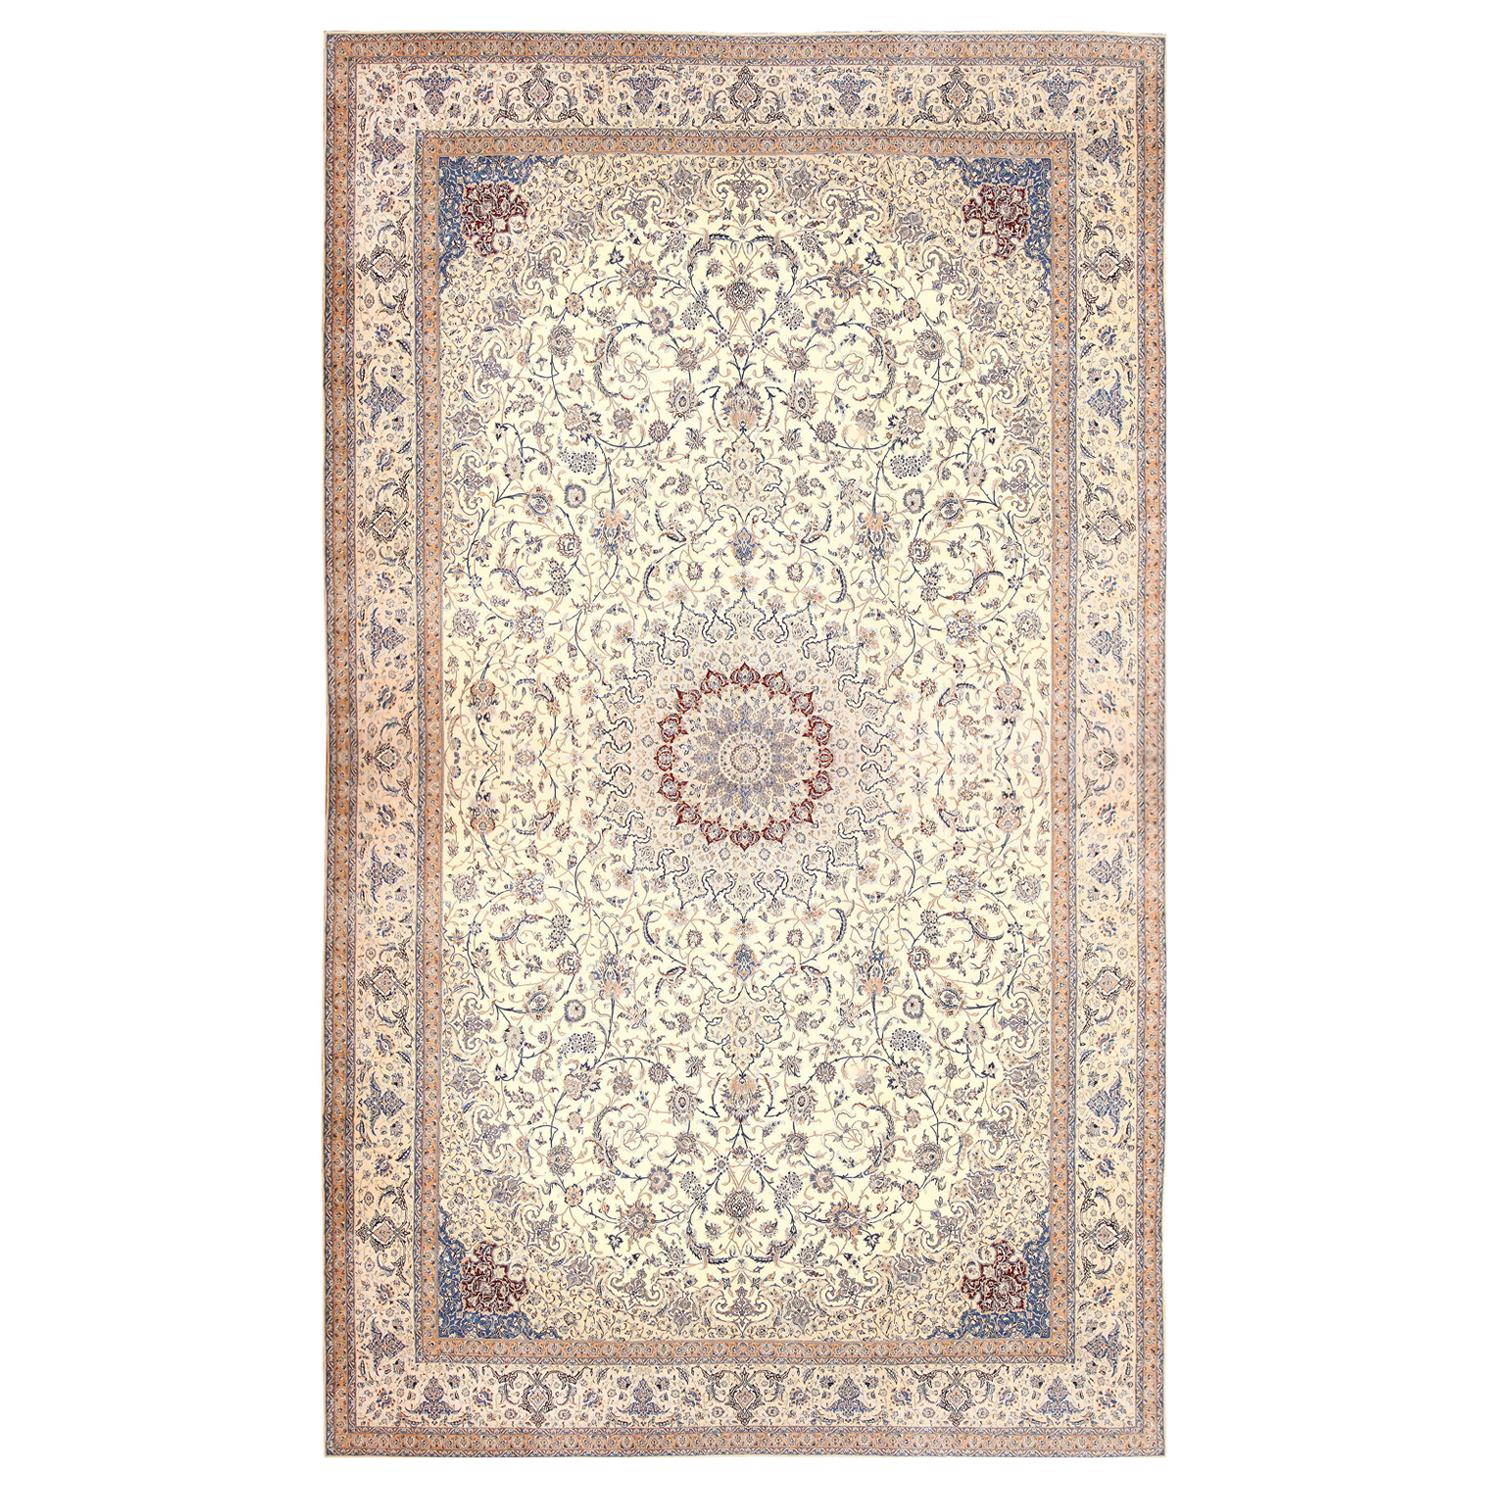 Palace Size Fine Silk and Wool Persian Nain Carpet. Size: 20 ft 6 in x 35 ft